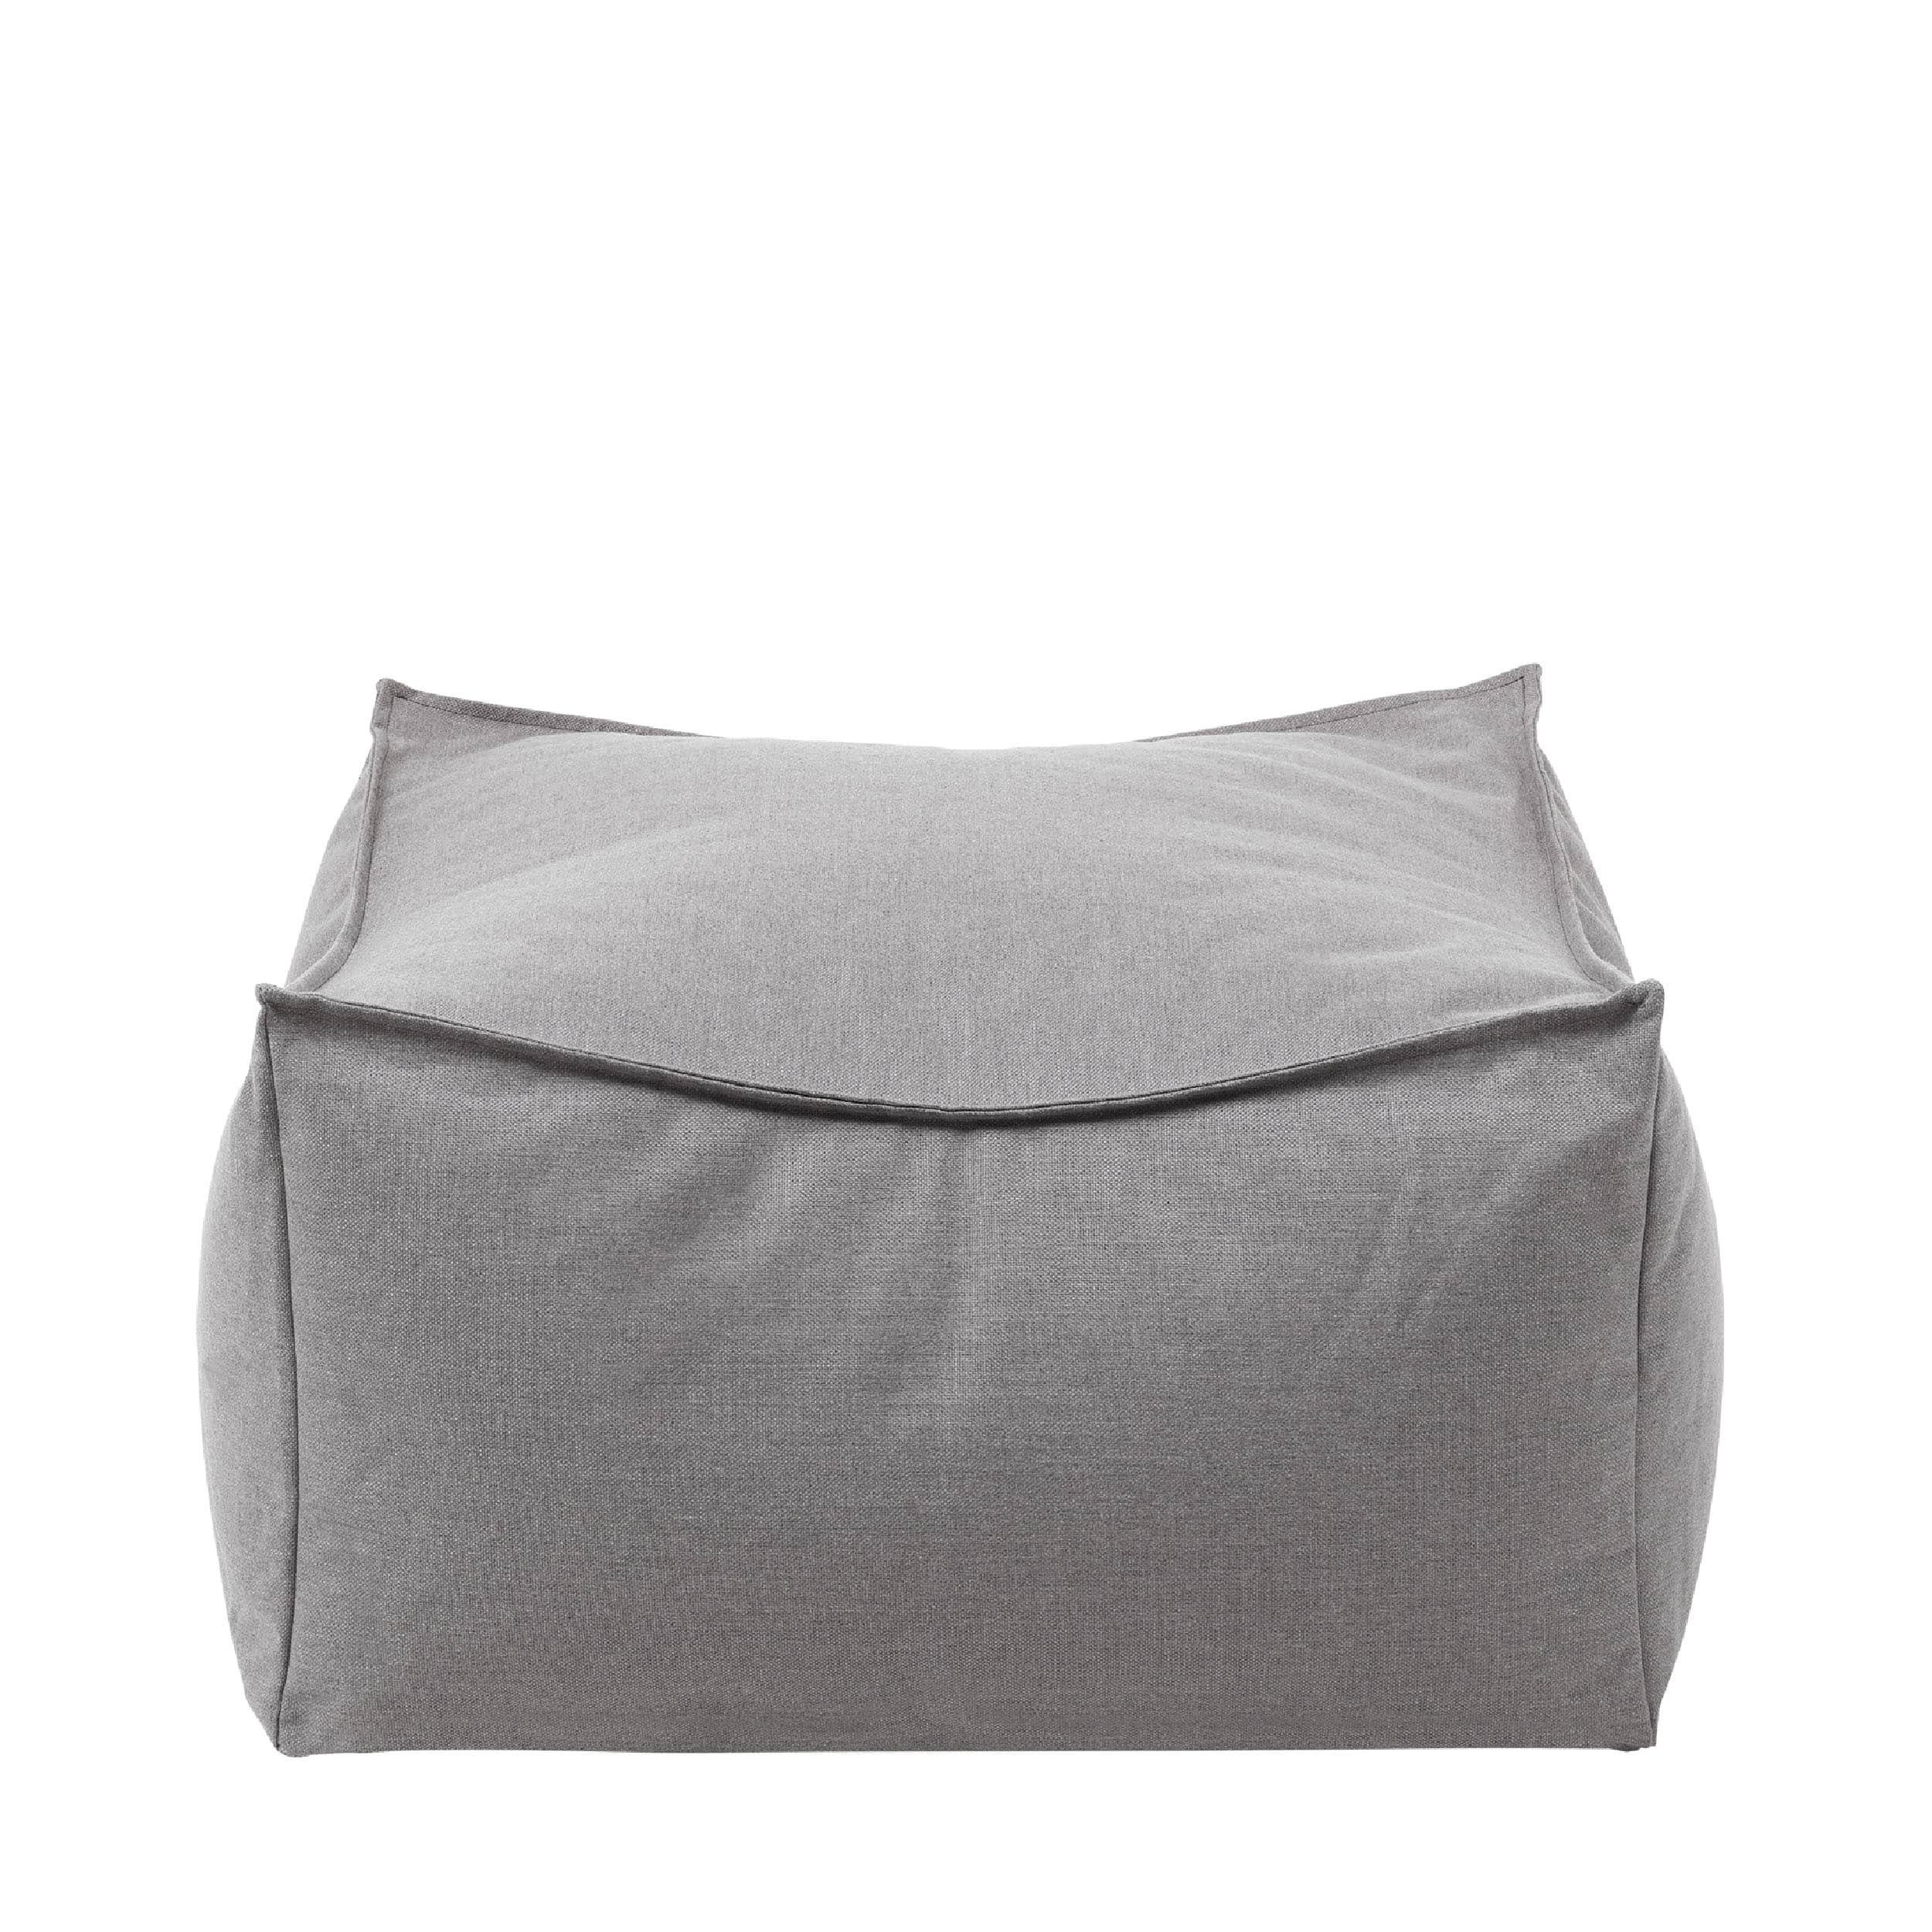 Stay Lounger Outdoor Pouf